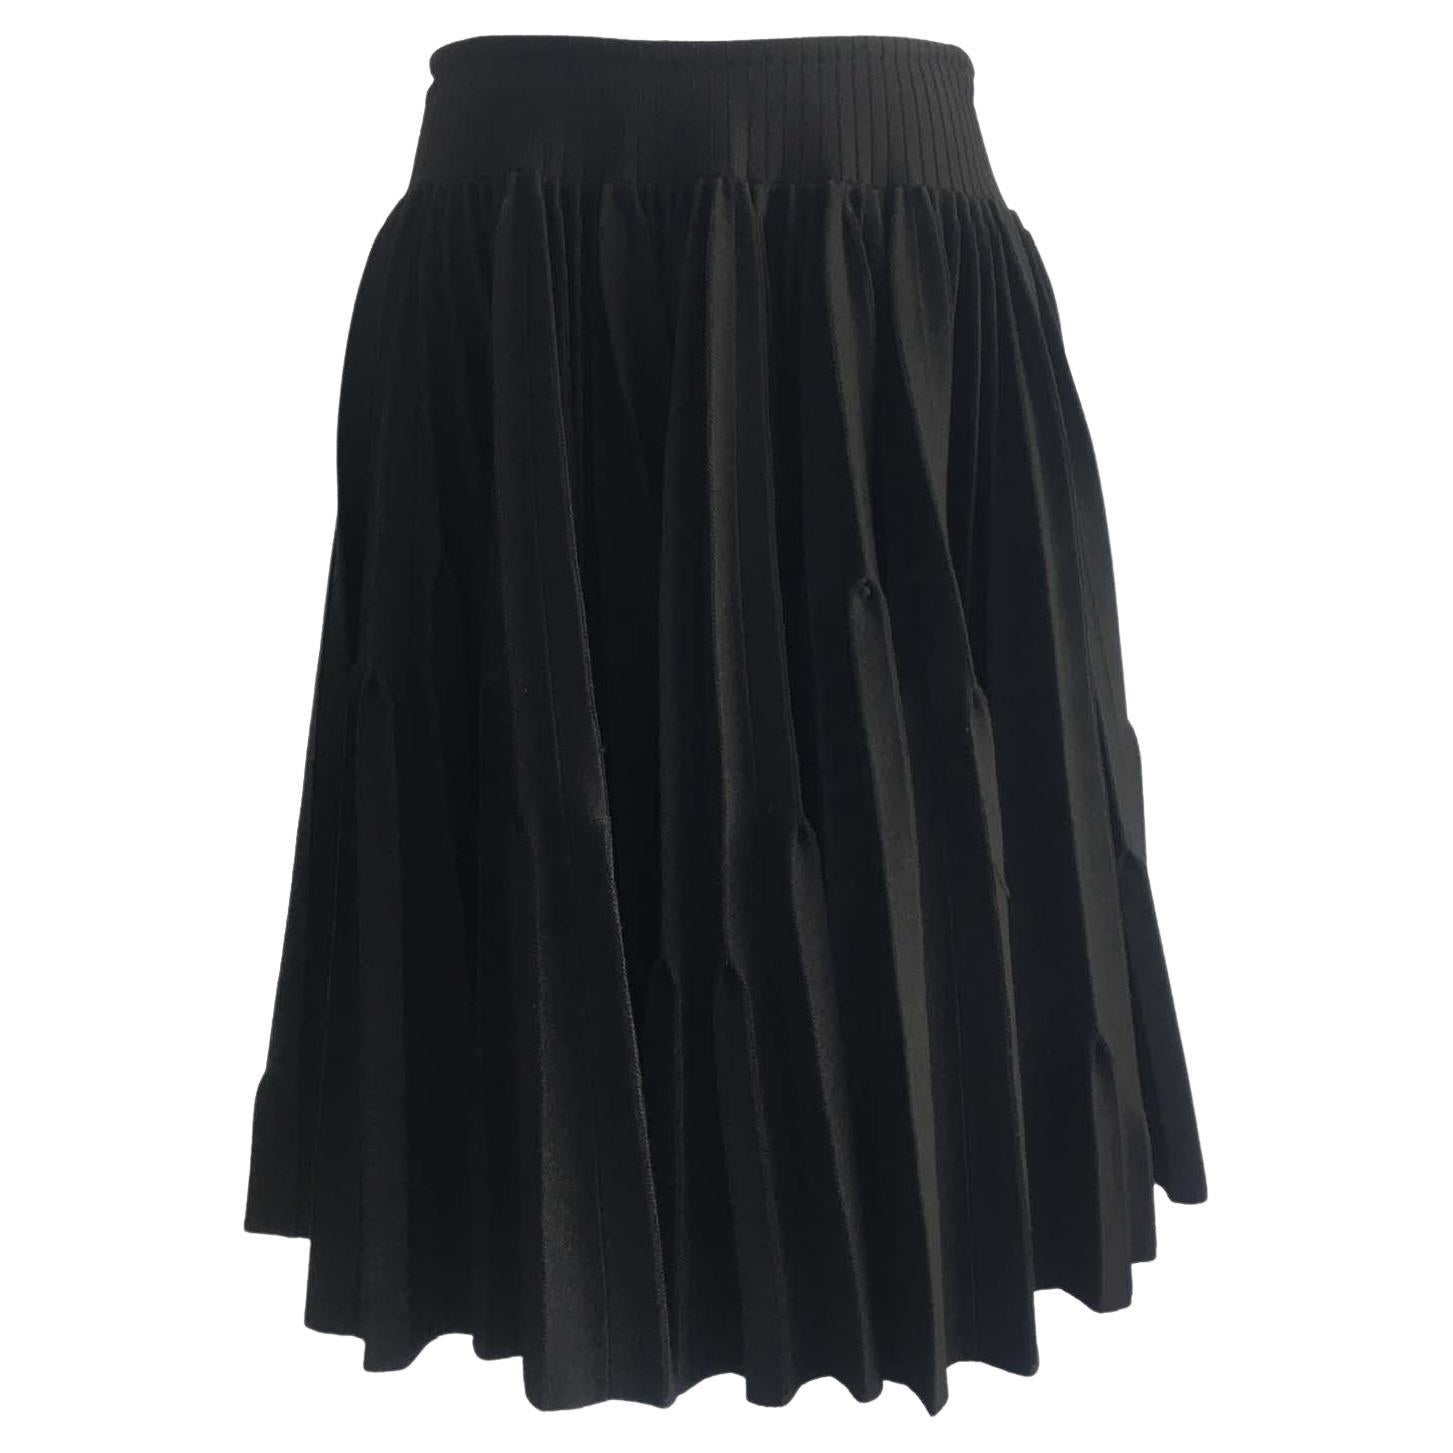 Alaïa black wool base pleated volumed circle skirt with high-rise waist. 
Double pleated design,  very calculated contrasting silhouette.
With Zip fastening at the back. Made in Italy.
Size tag : 38 FR
80% wool, Polyamide 10%, viscose 5% and nylon